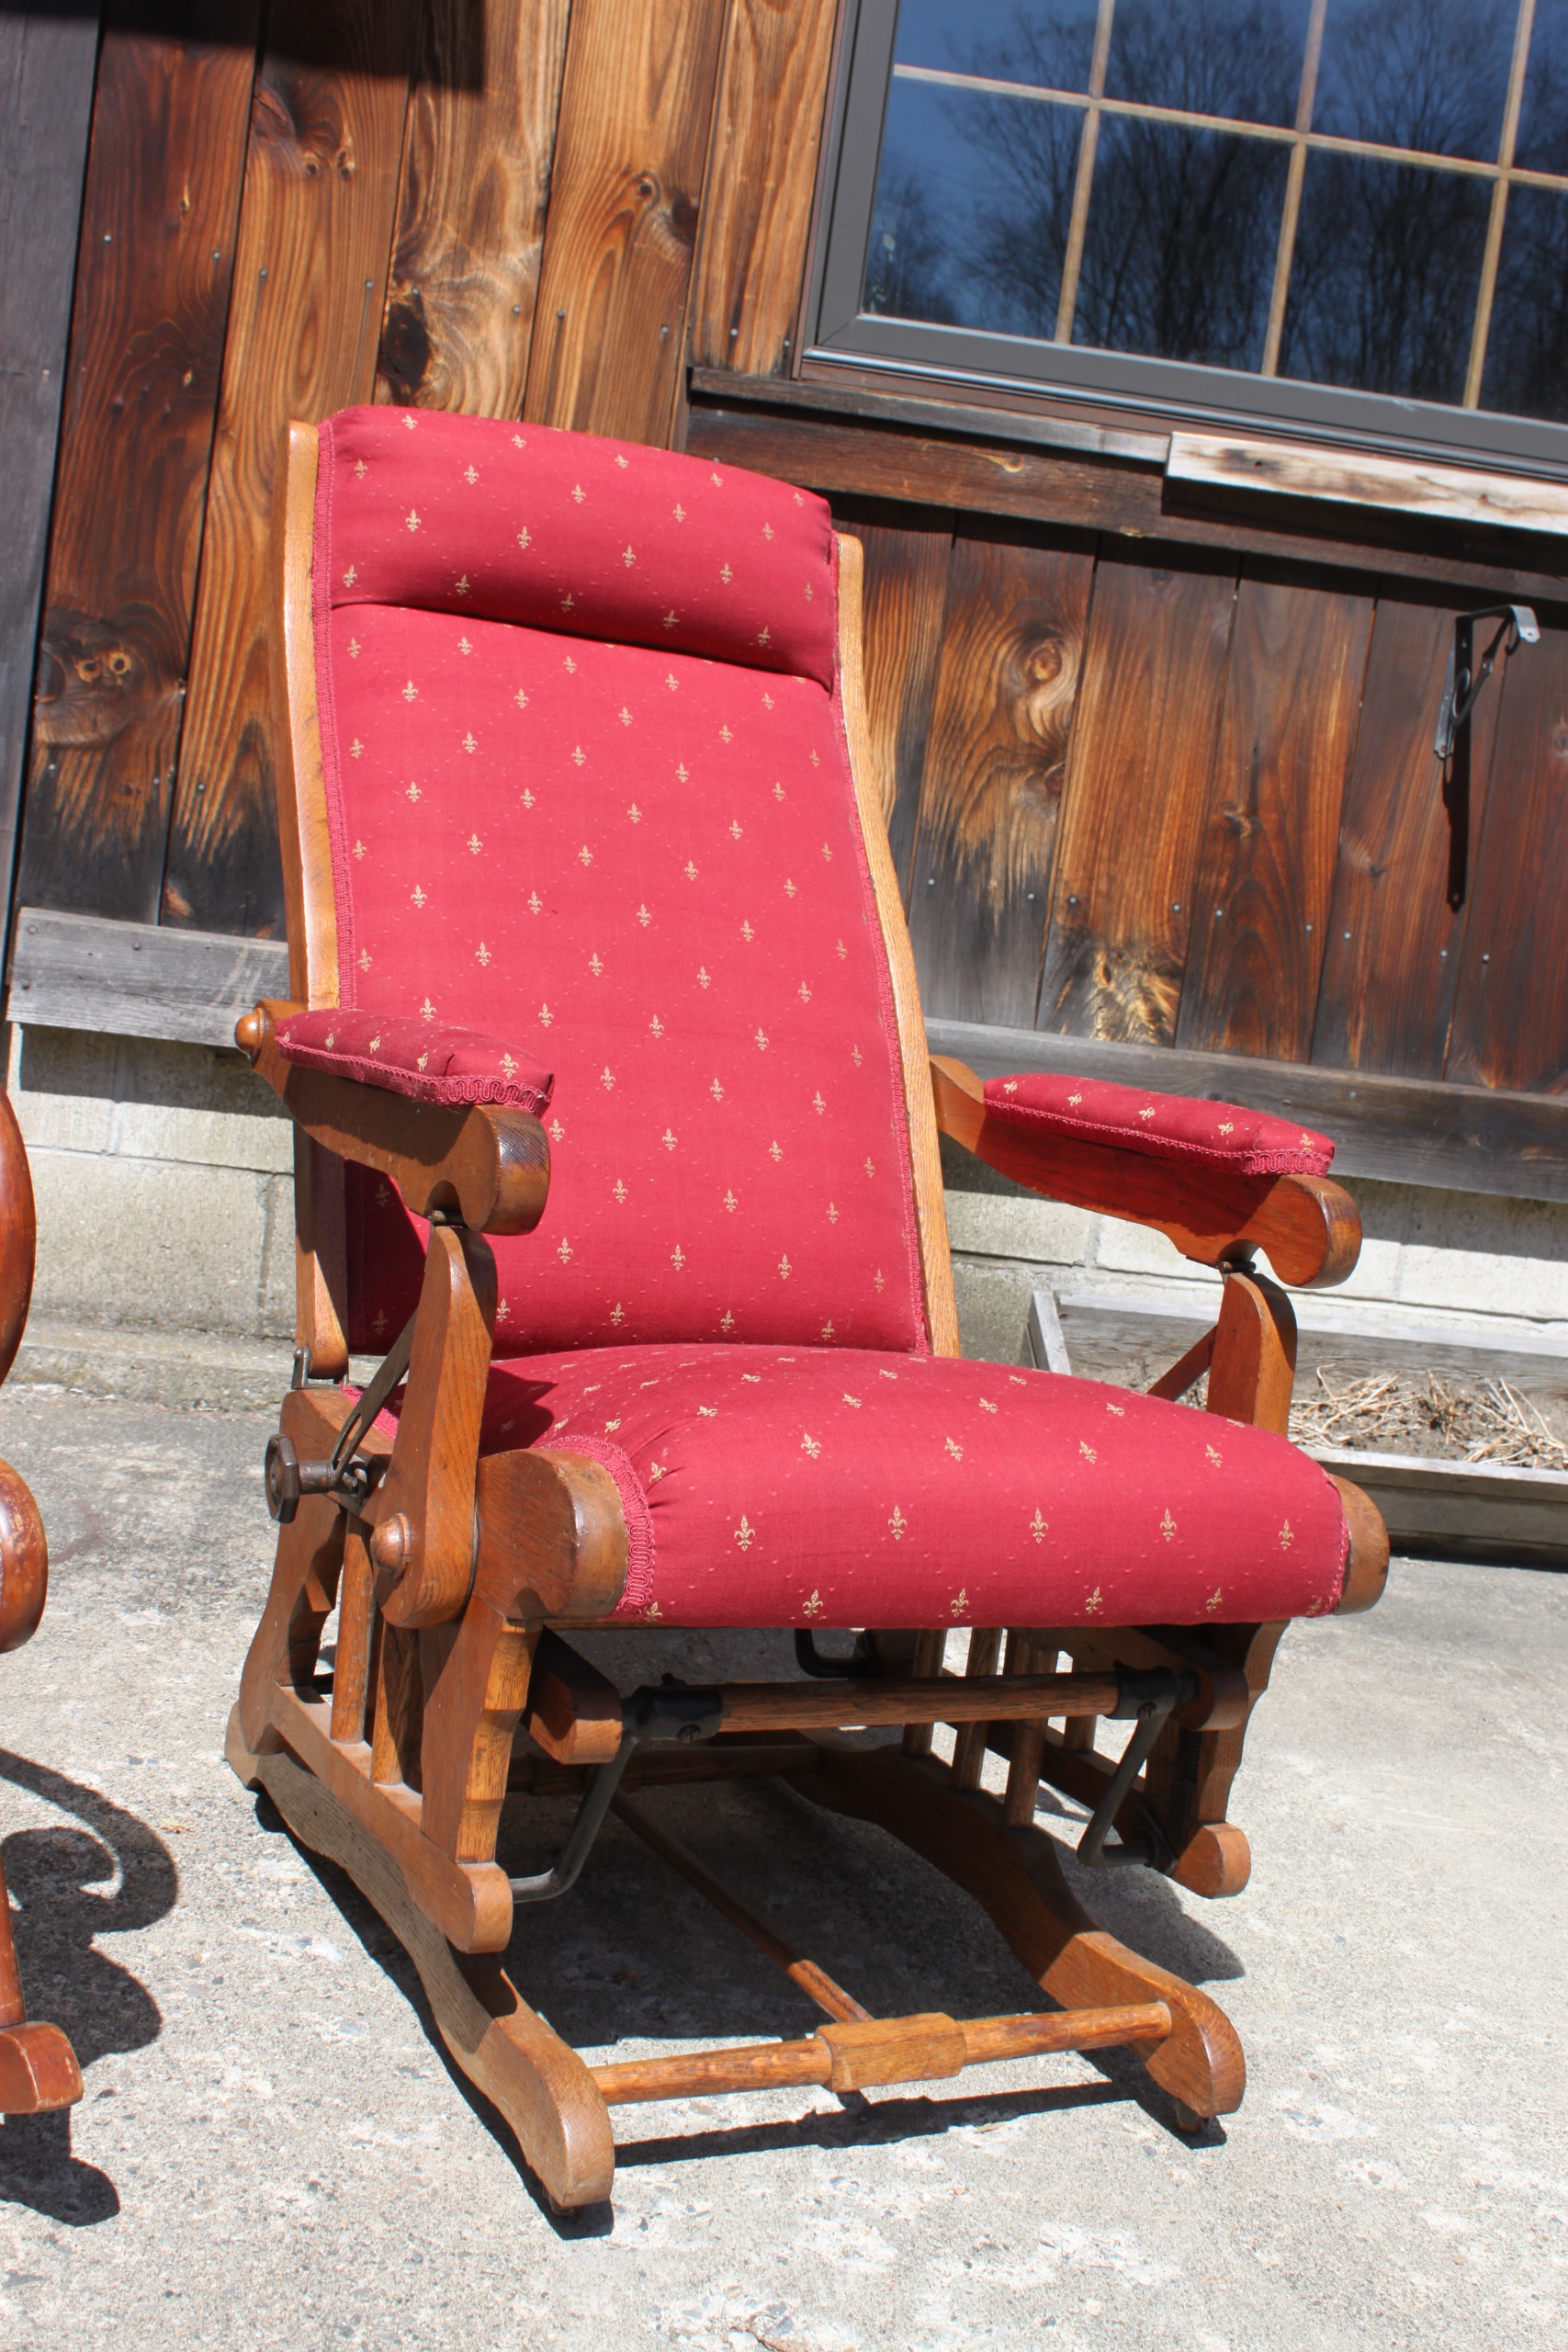 Beginner upholstery projects a rocking chair | Performing Upholstery Client Work Too Soon